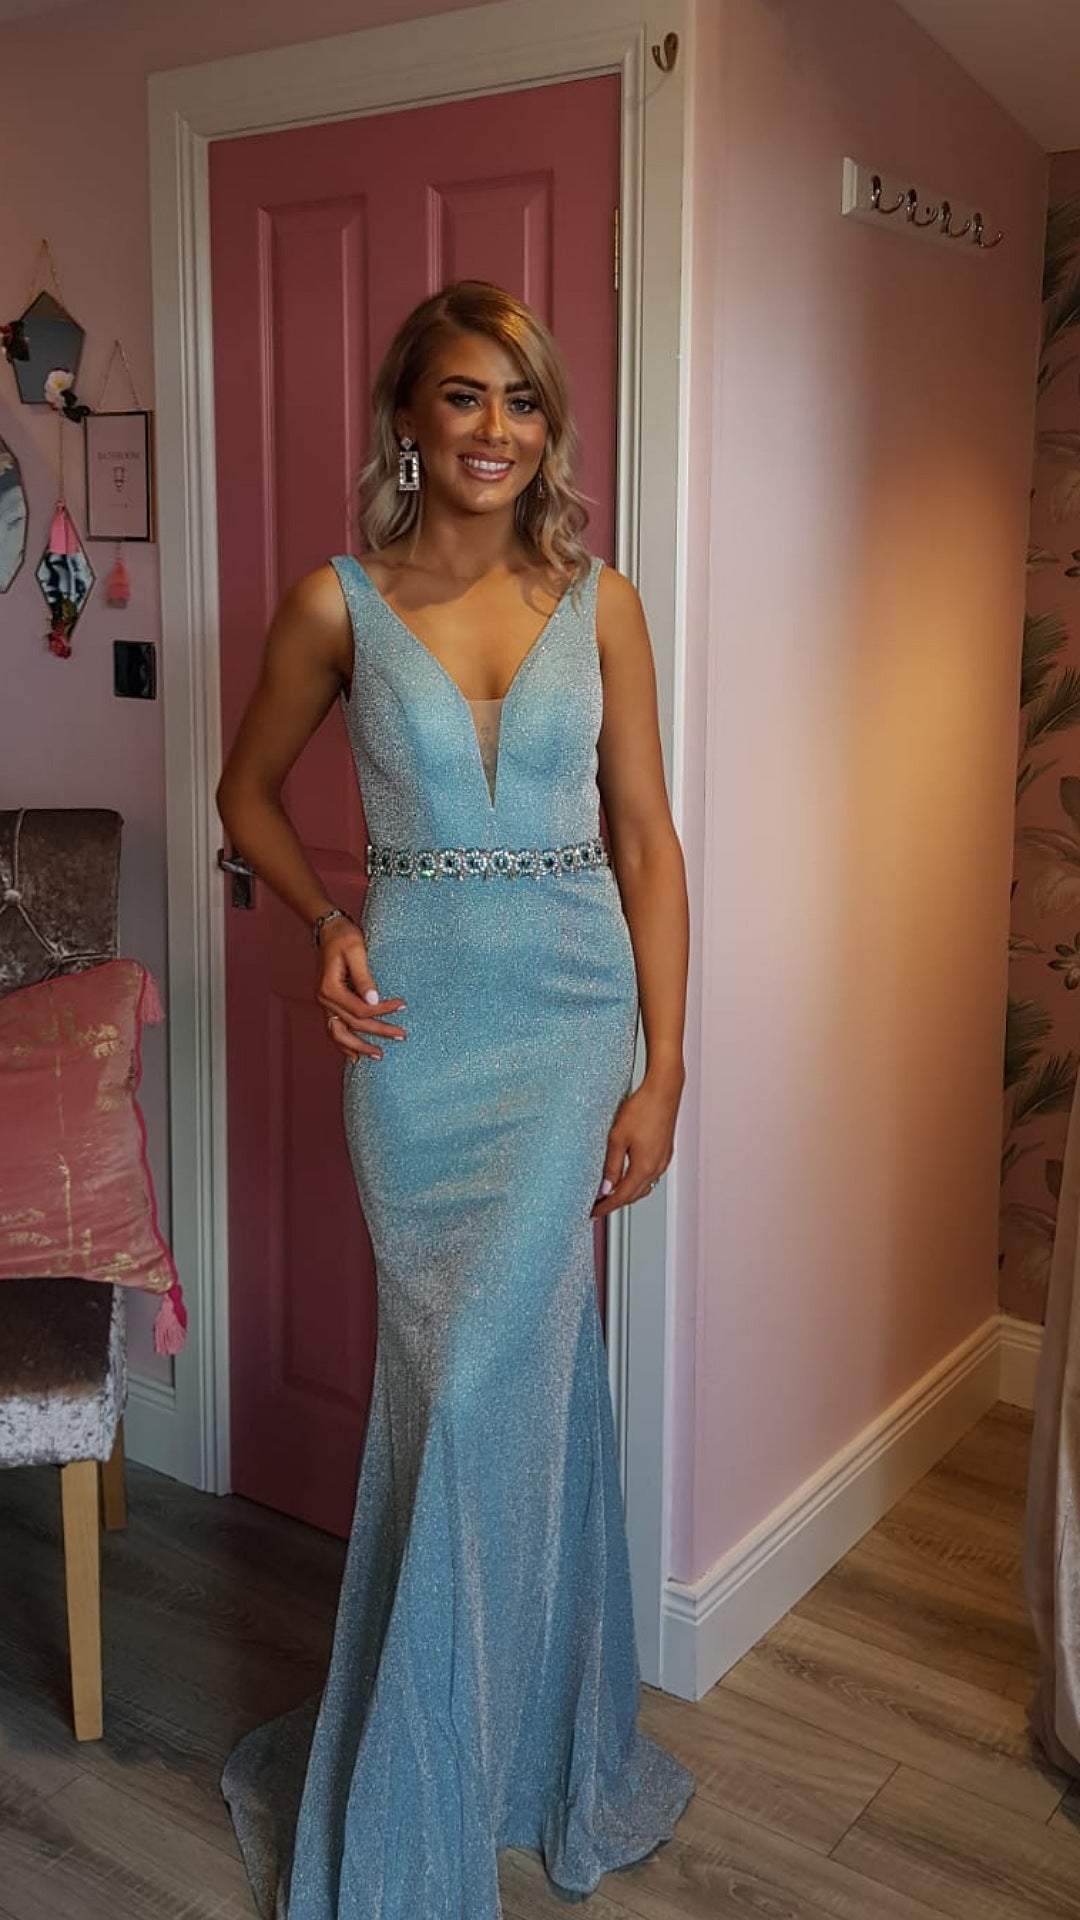 Leah Baby Blue Sparkly Glitter Metallic Formal Prom Dress